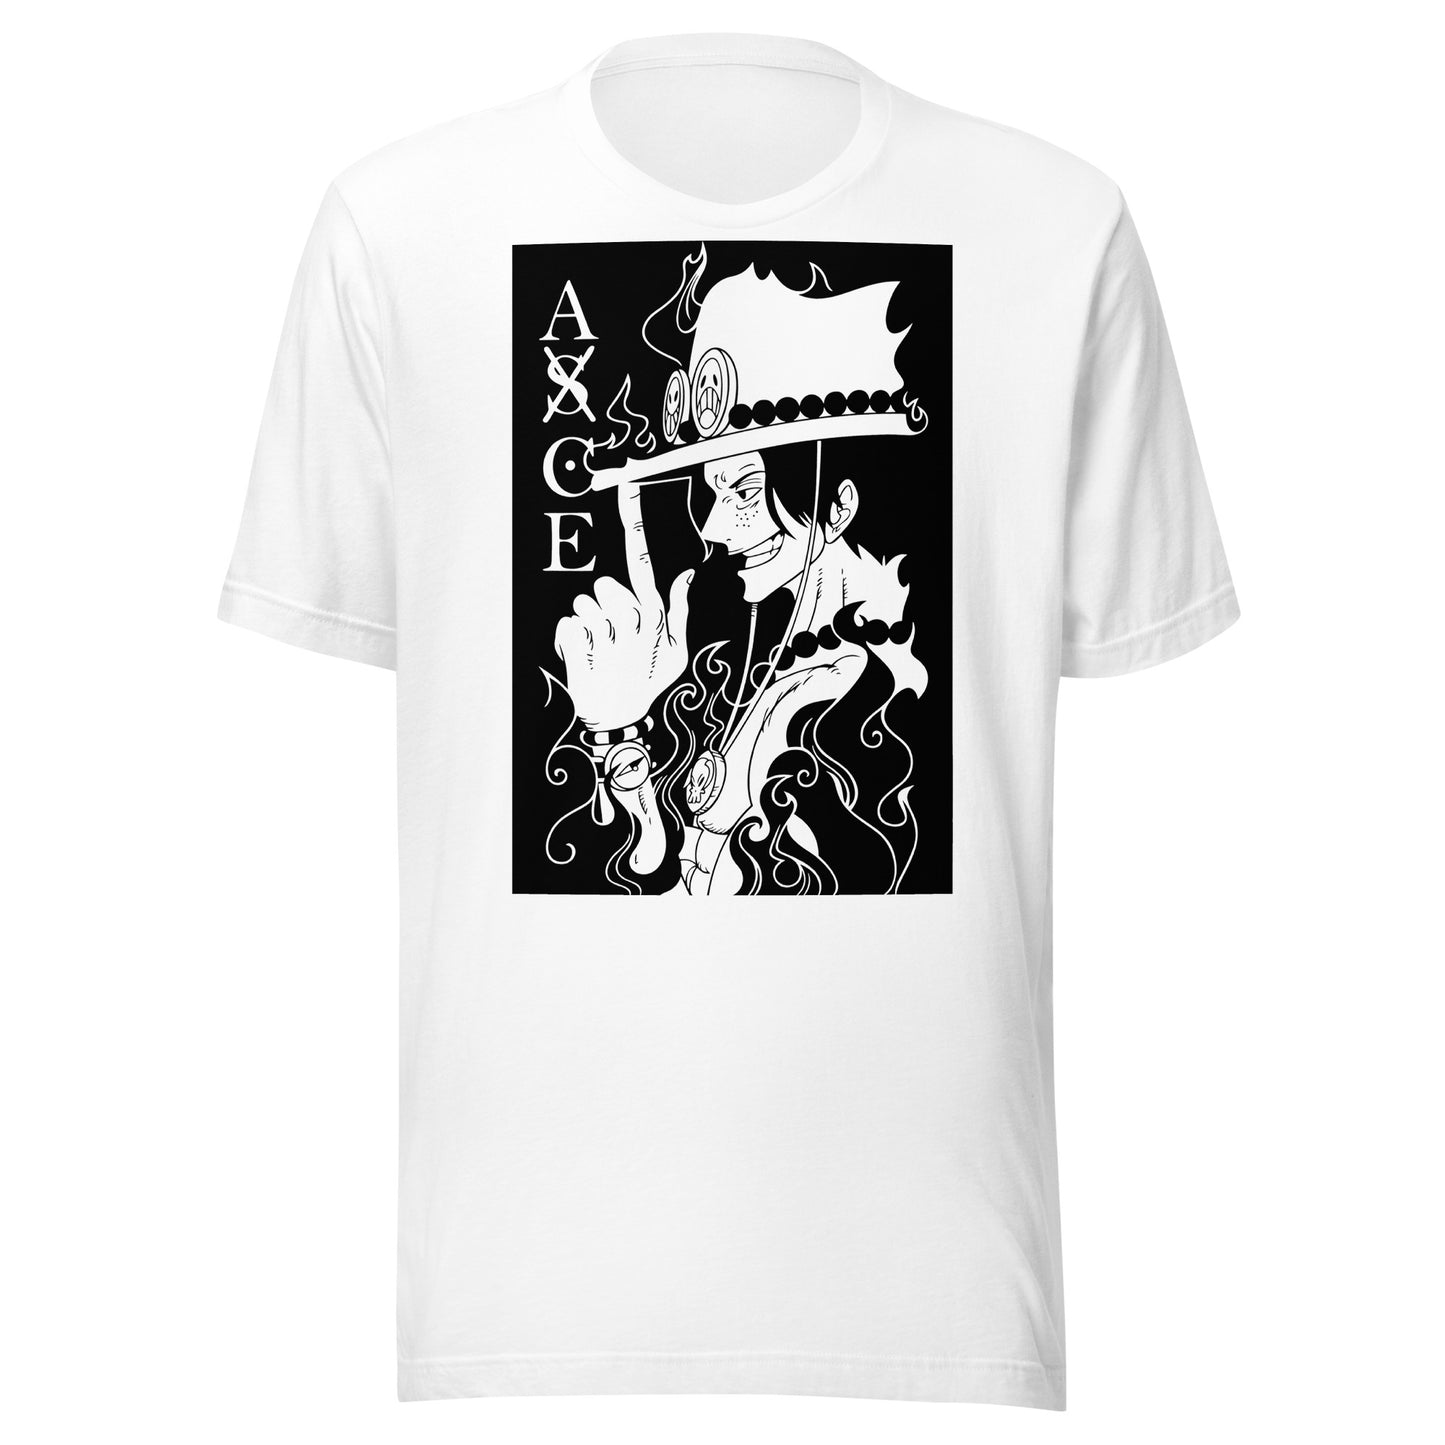 Black and White Ace T Shirt